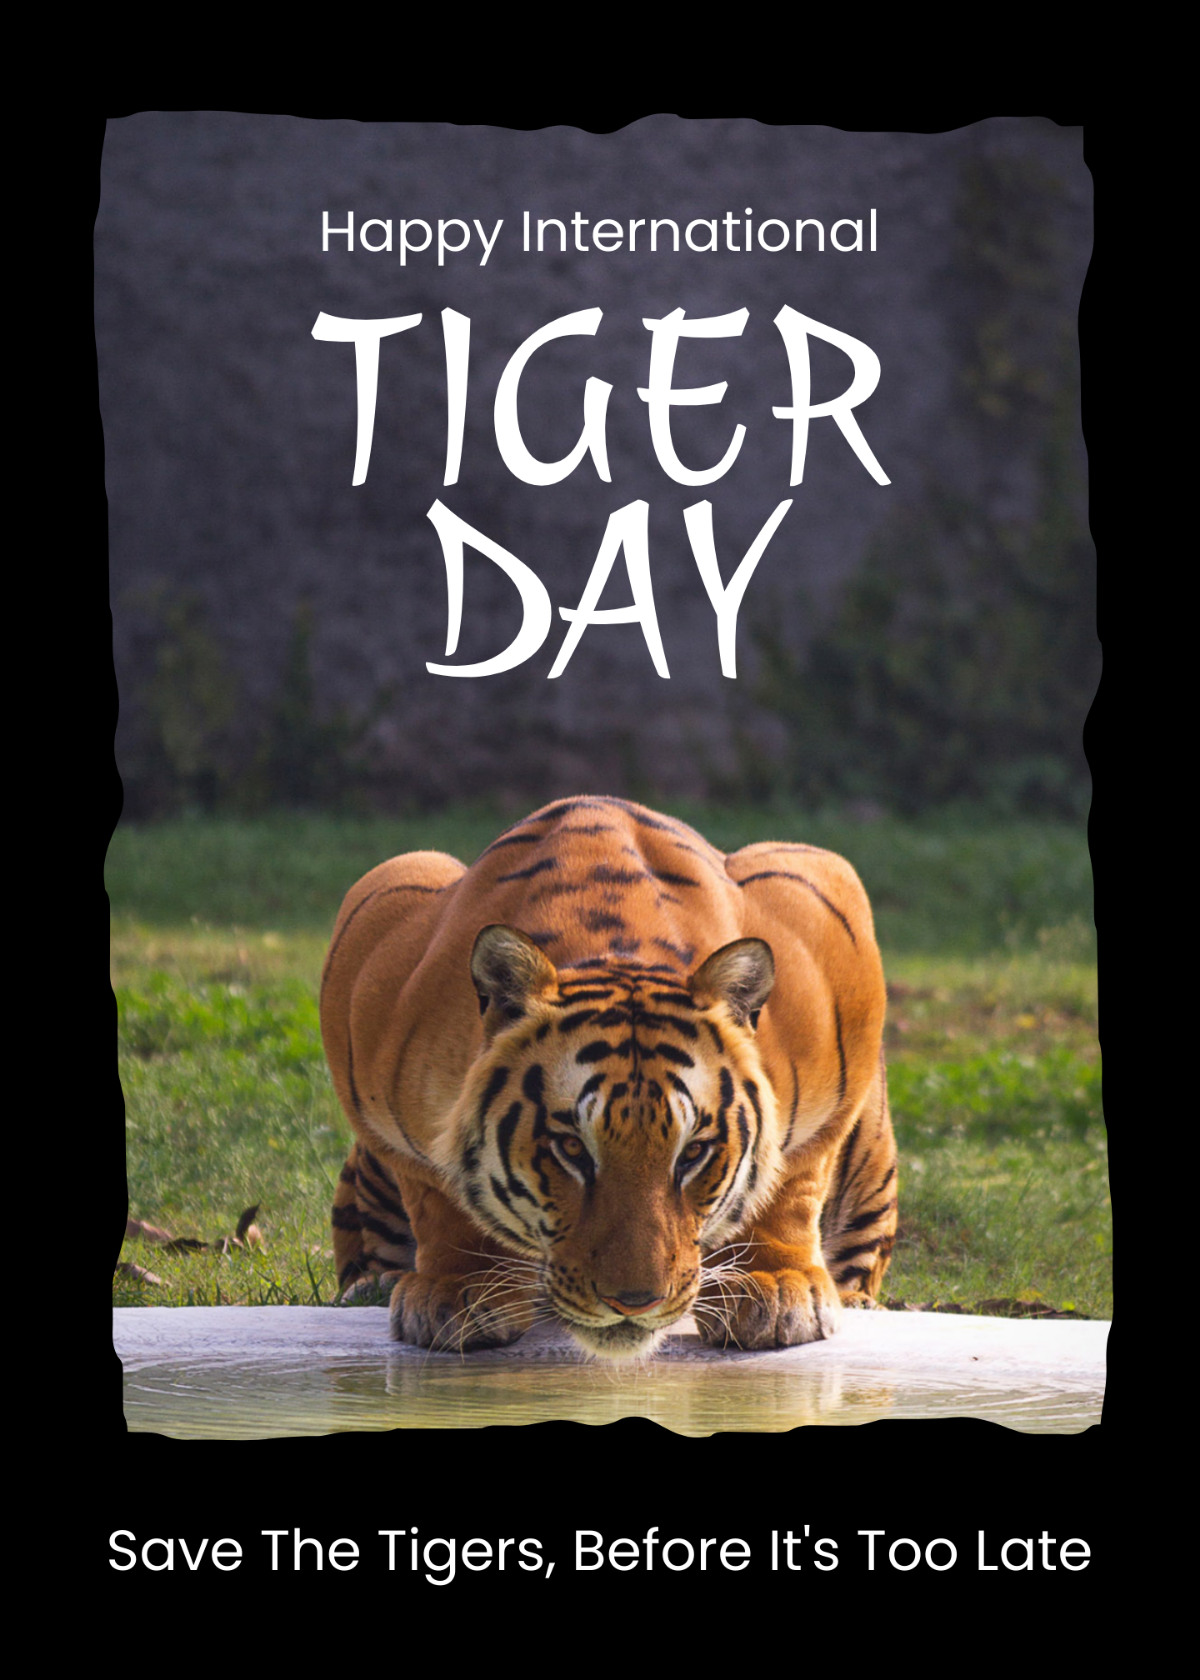 International Tiger Day Greeting Card Template